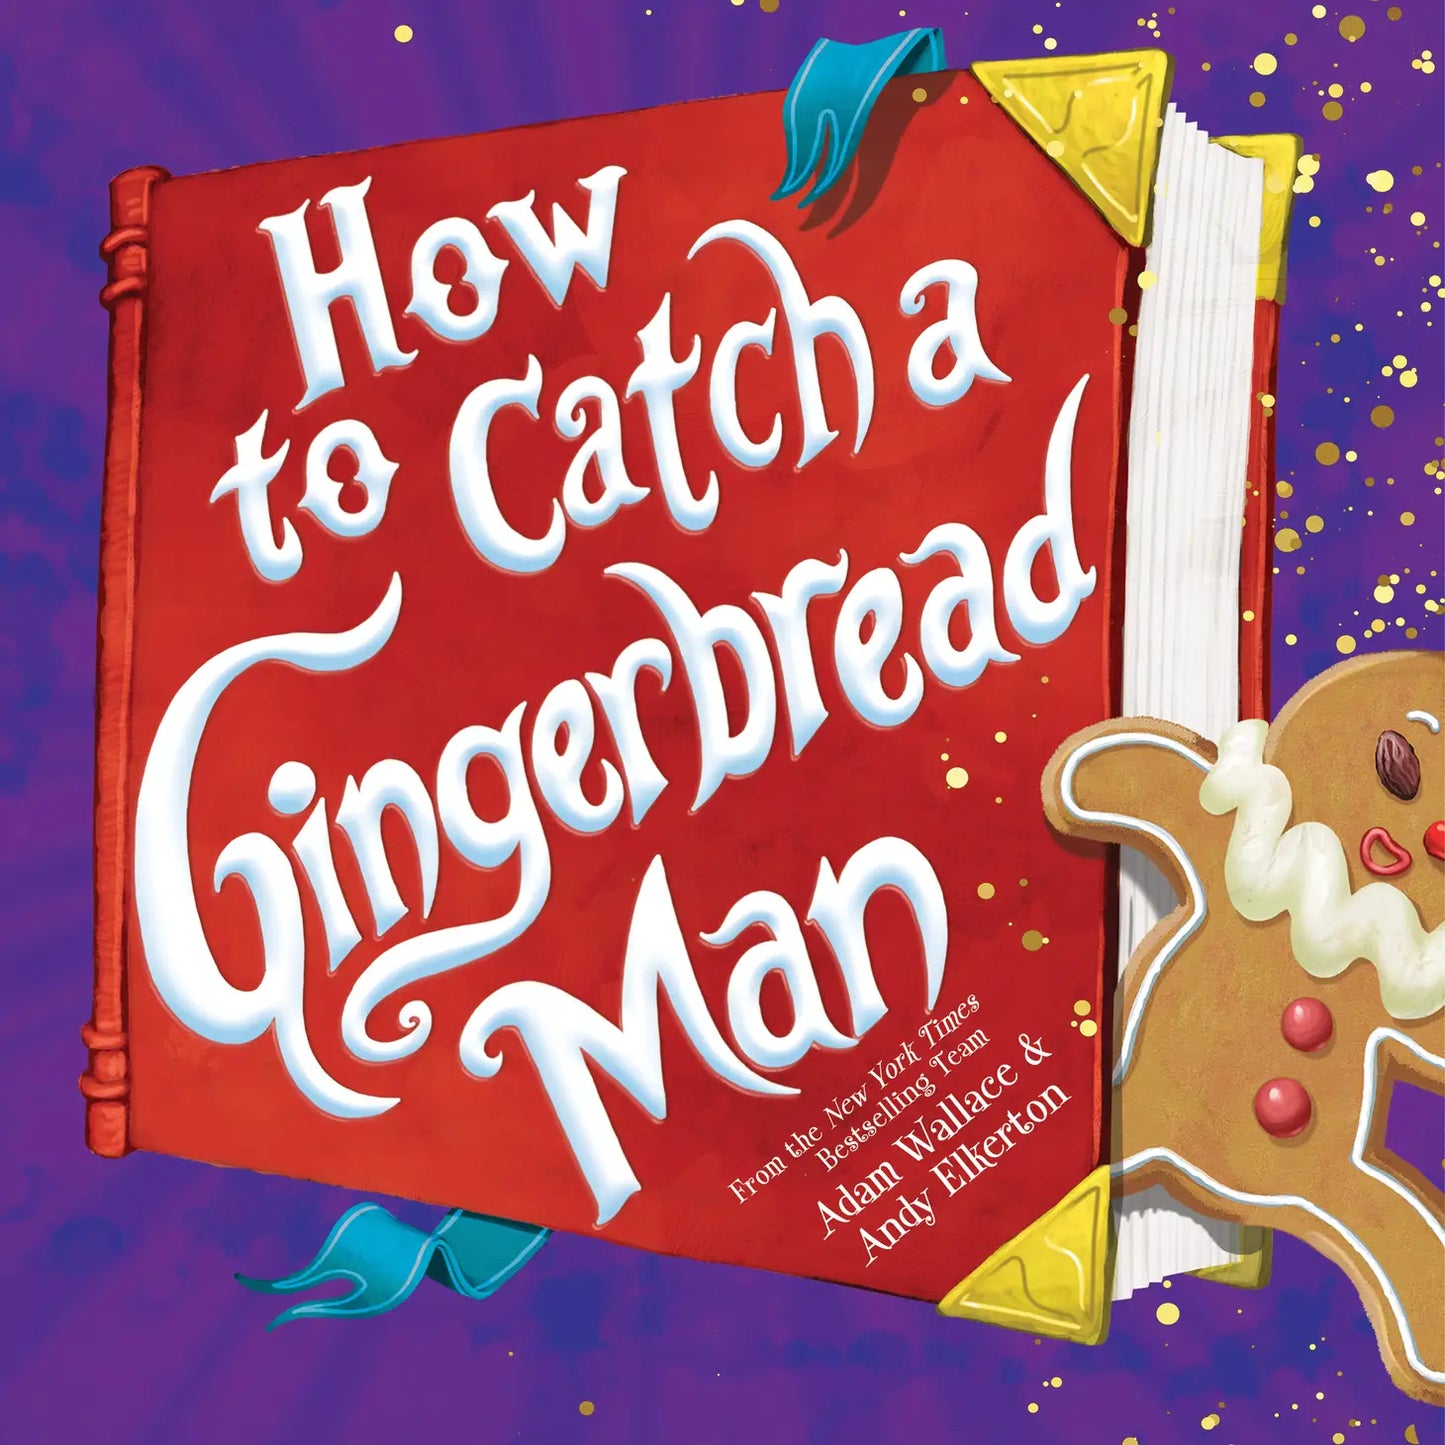 How to Catch an Gingerbread Man Book